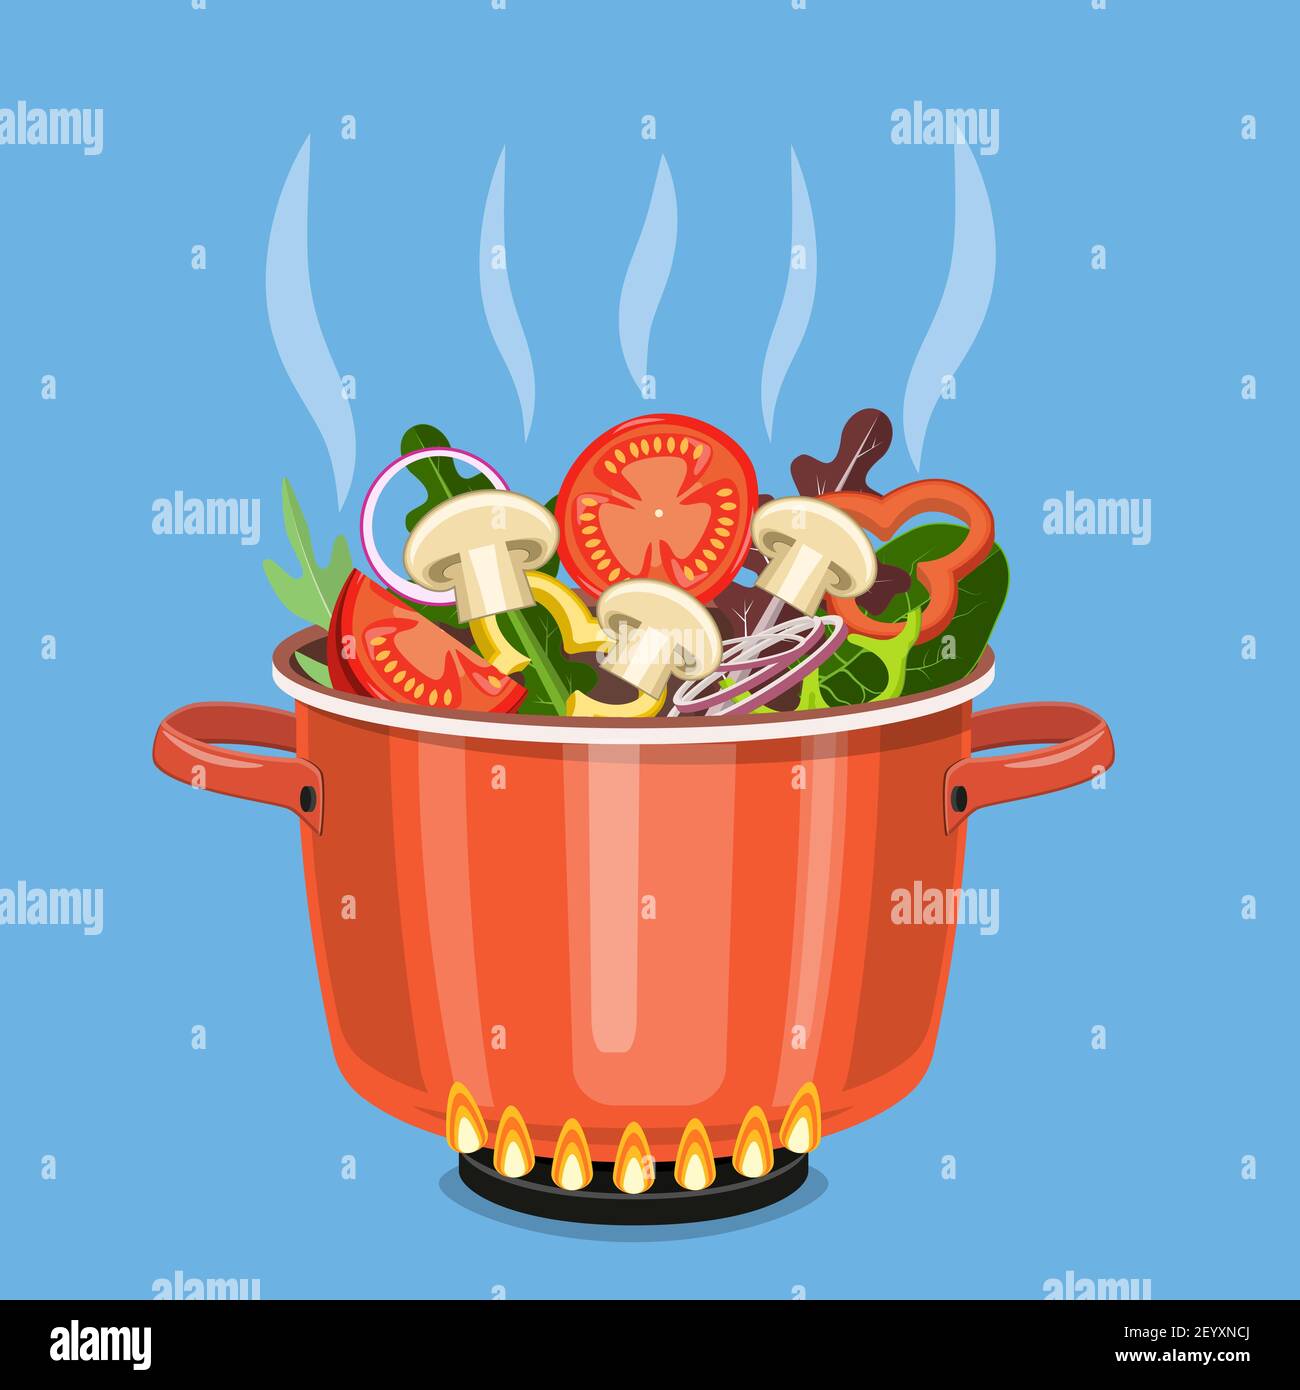 Cooking pot on stove with vegetables, Stock Vector